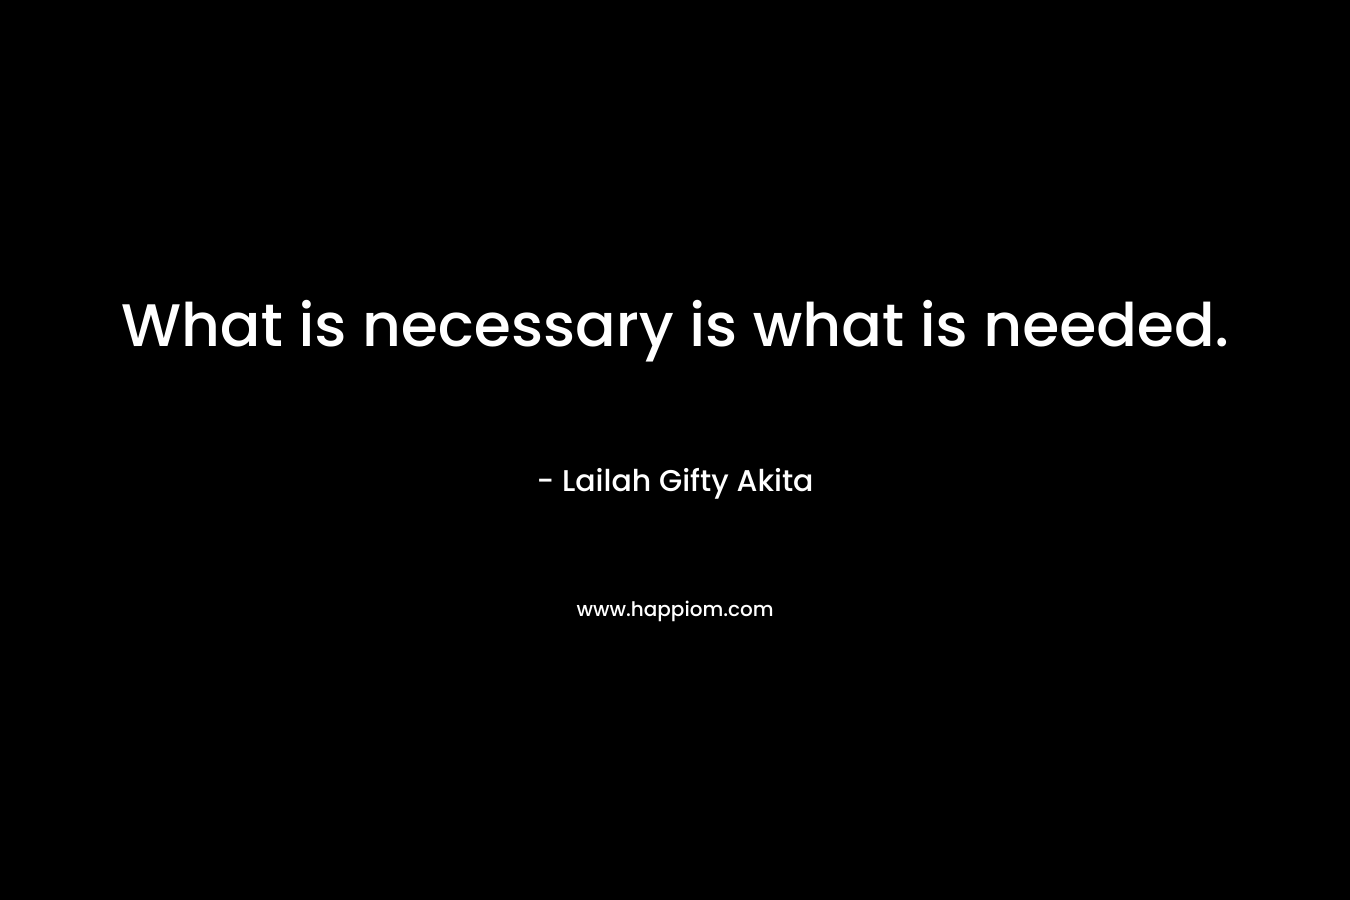 What is necessary is what is needed.